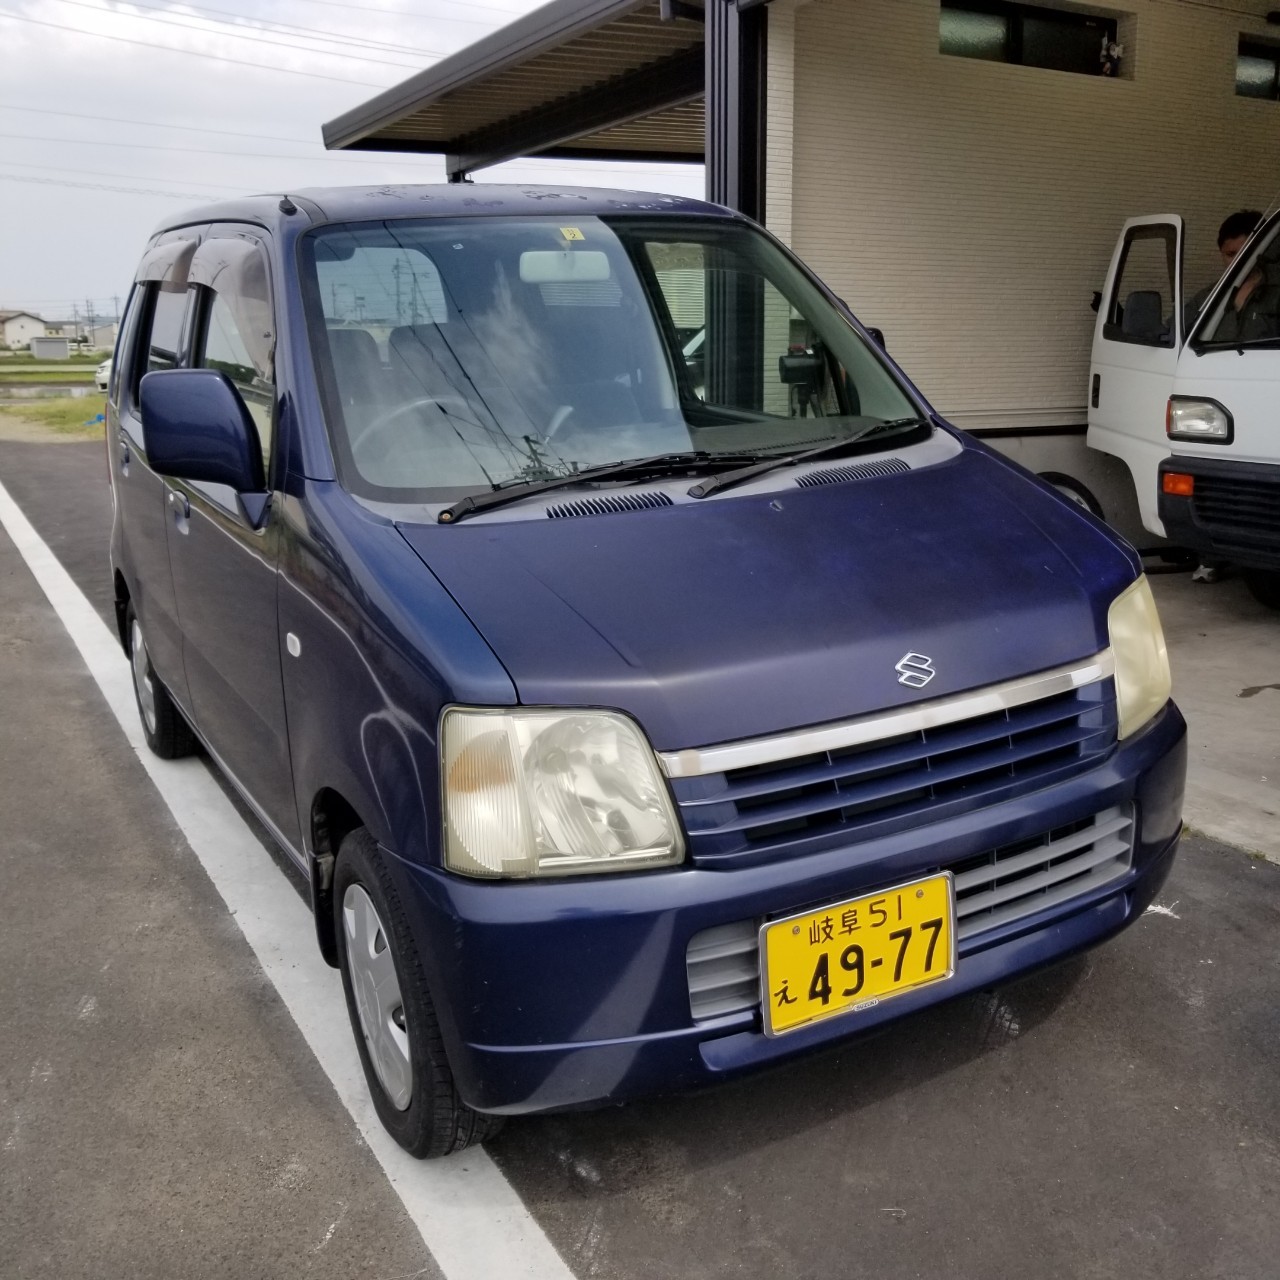 sold】総額ASK万円☆Tチェーン☆平成14年式 スズキ ワゴンR N-1(MC22S